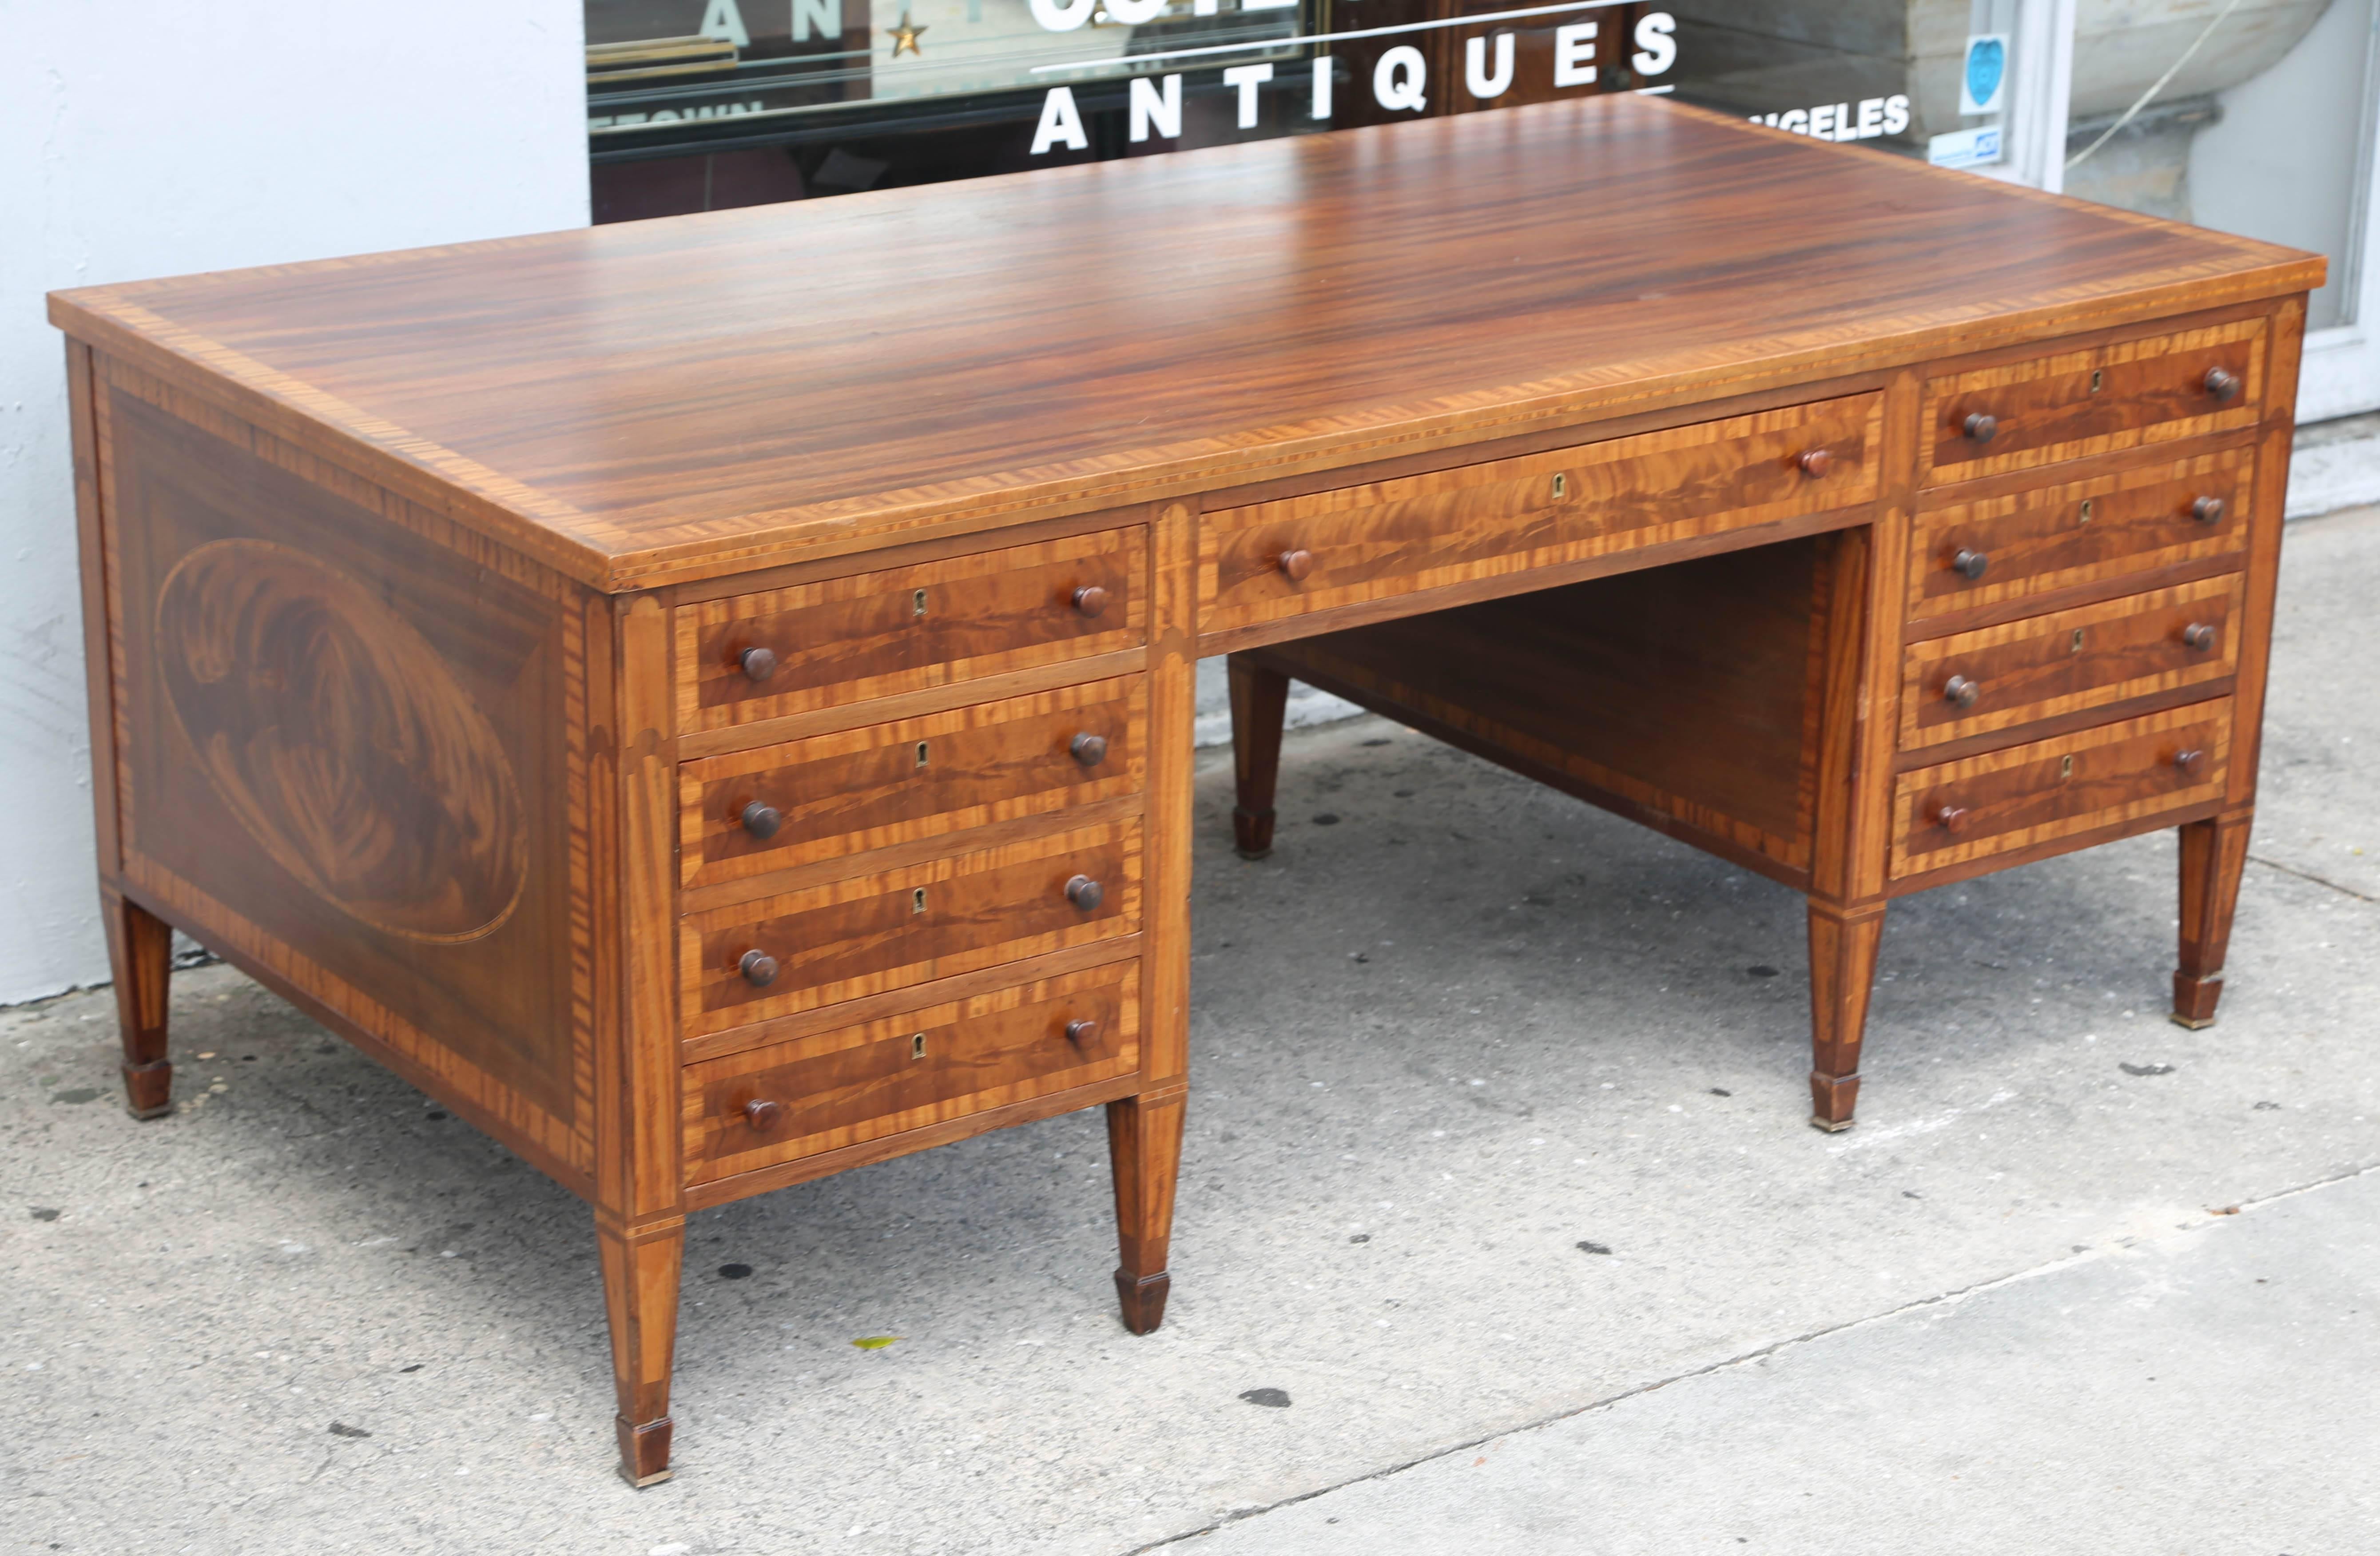 L. Kreiss and sons marquetry partner's desk, early 1900s, nine drawers on each side, inlaid and matched veneers, dovetail joints, labeled L. KREISS AND SONS SAN FRANCISCO, very good condition.
Kreiss were very good cabinet makers in the early